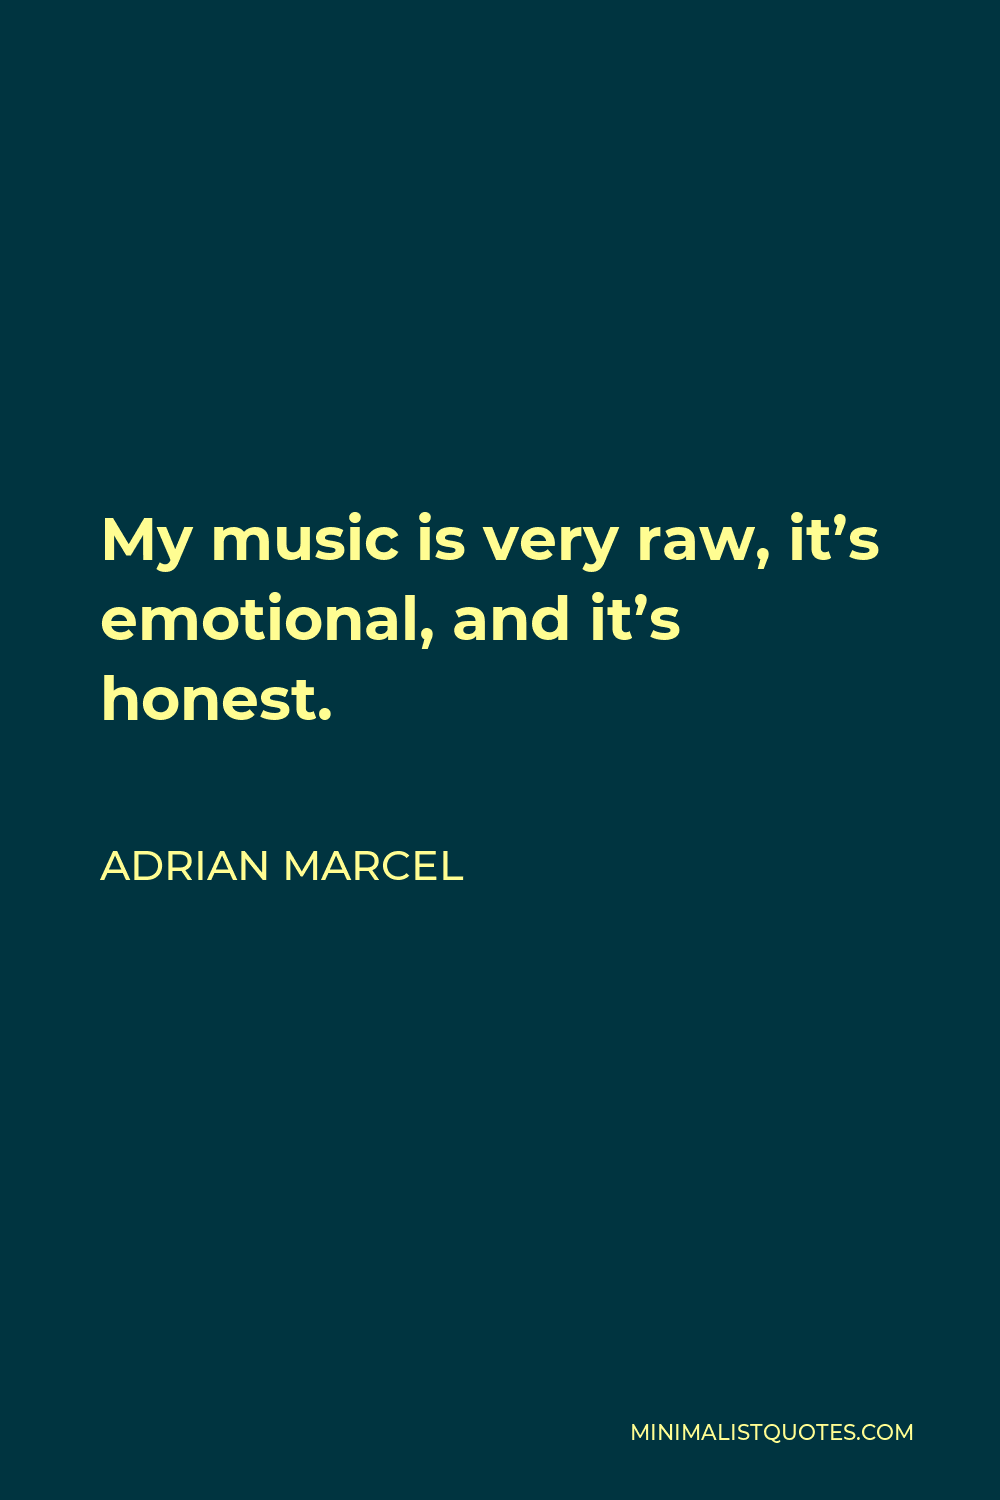 Adrian Marcel Quote - My music is very raw, it’s emotional, and it’s honest.